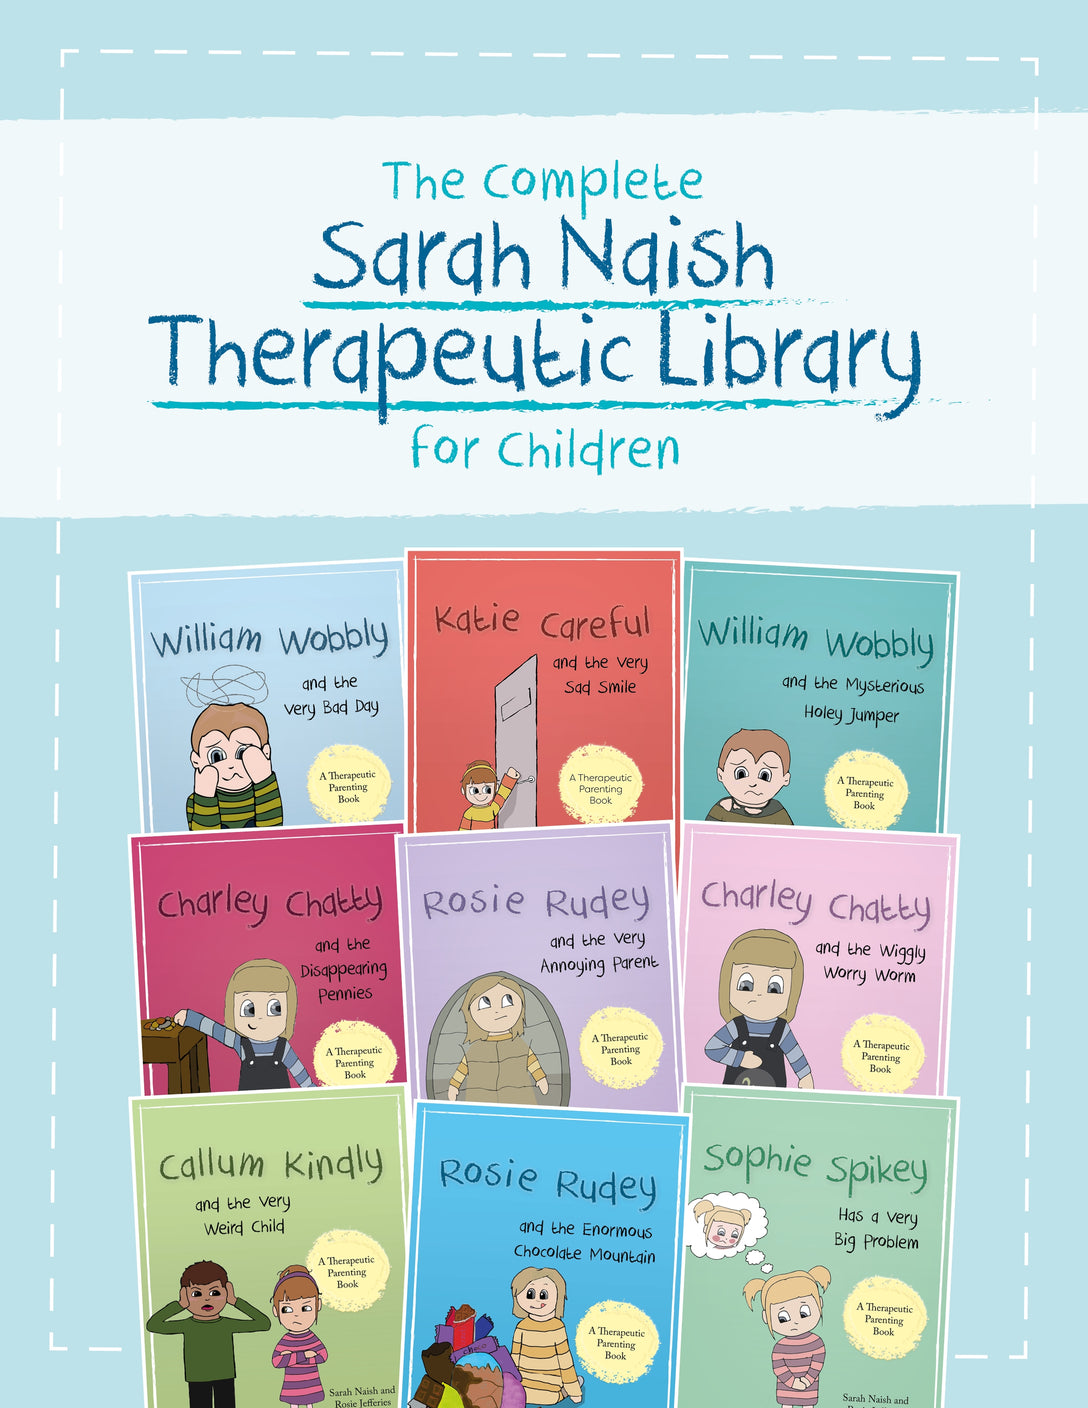 The Complete Sarah Naish Therapeutic Parenting Library for Children